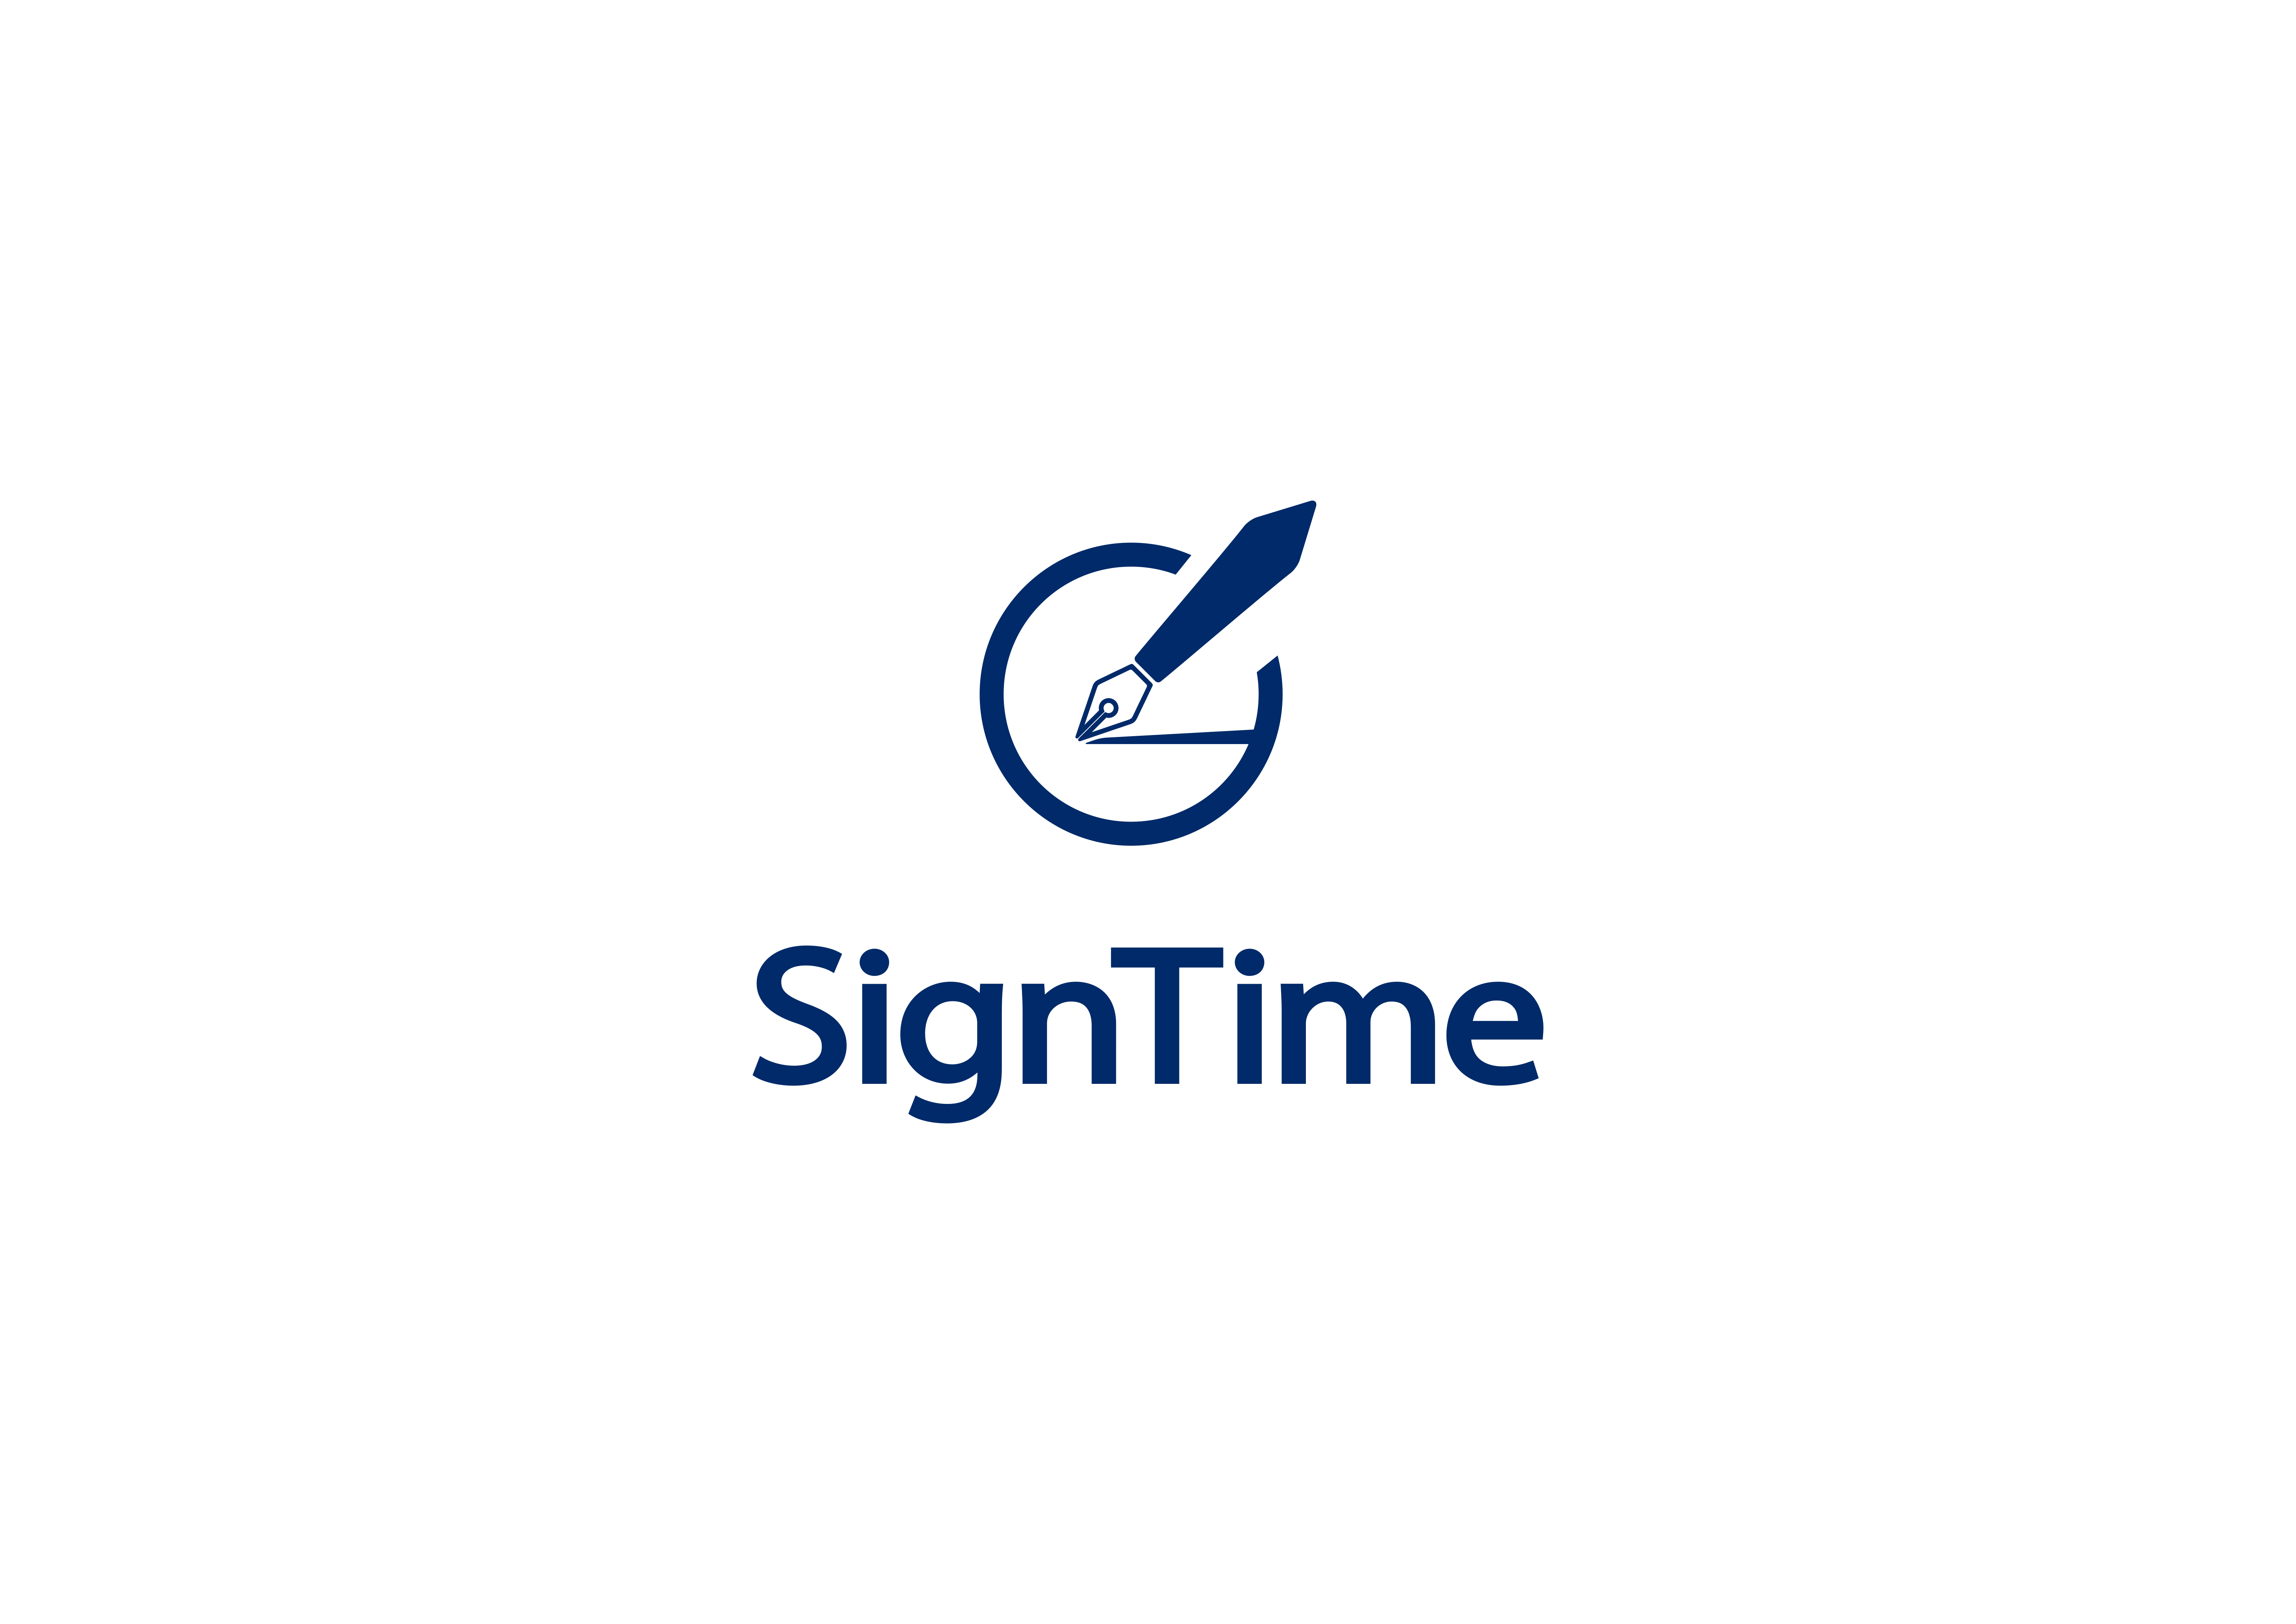 Jim Weisser, CEO of SignTime K.K. – Interviewed by Apple Podcastsのイメージ画像